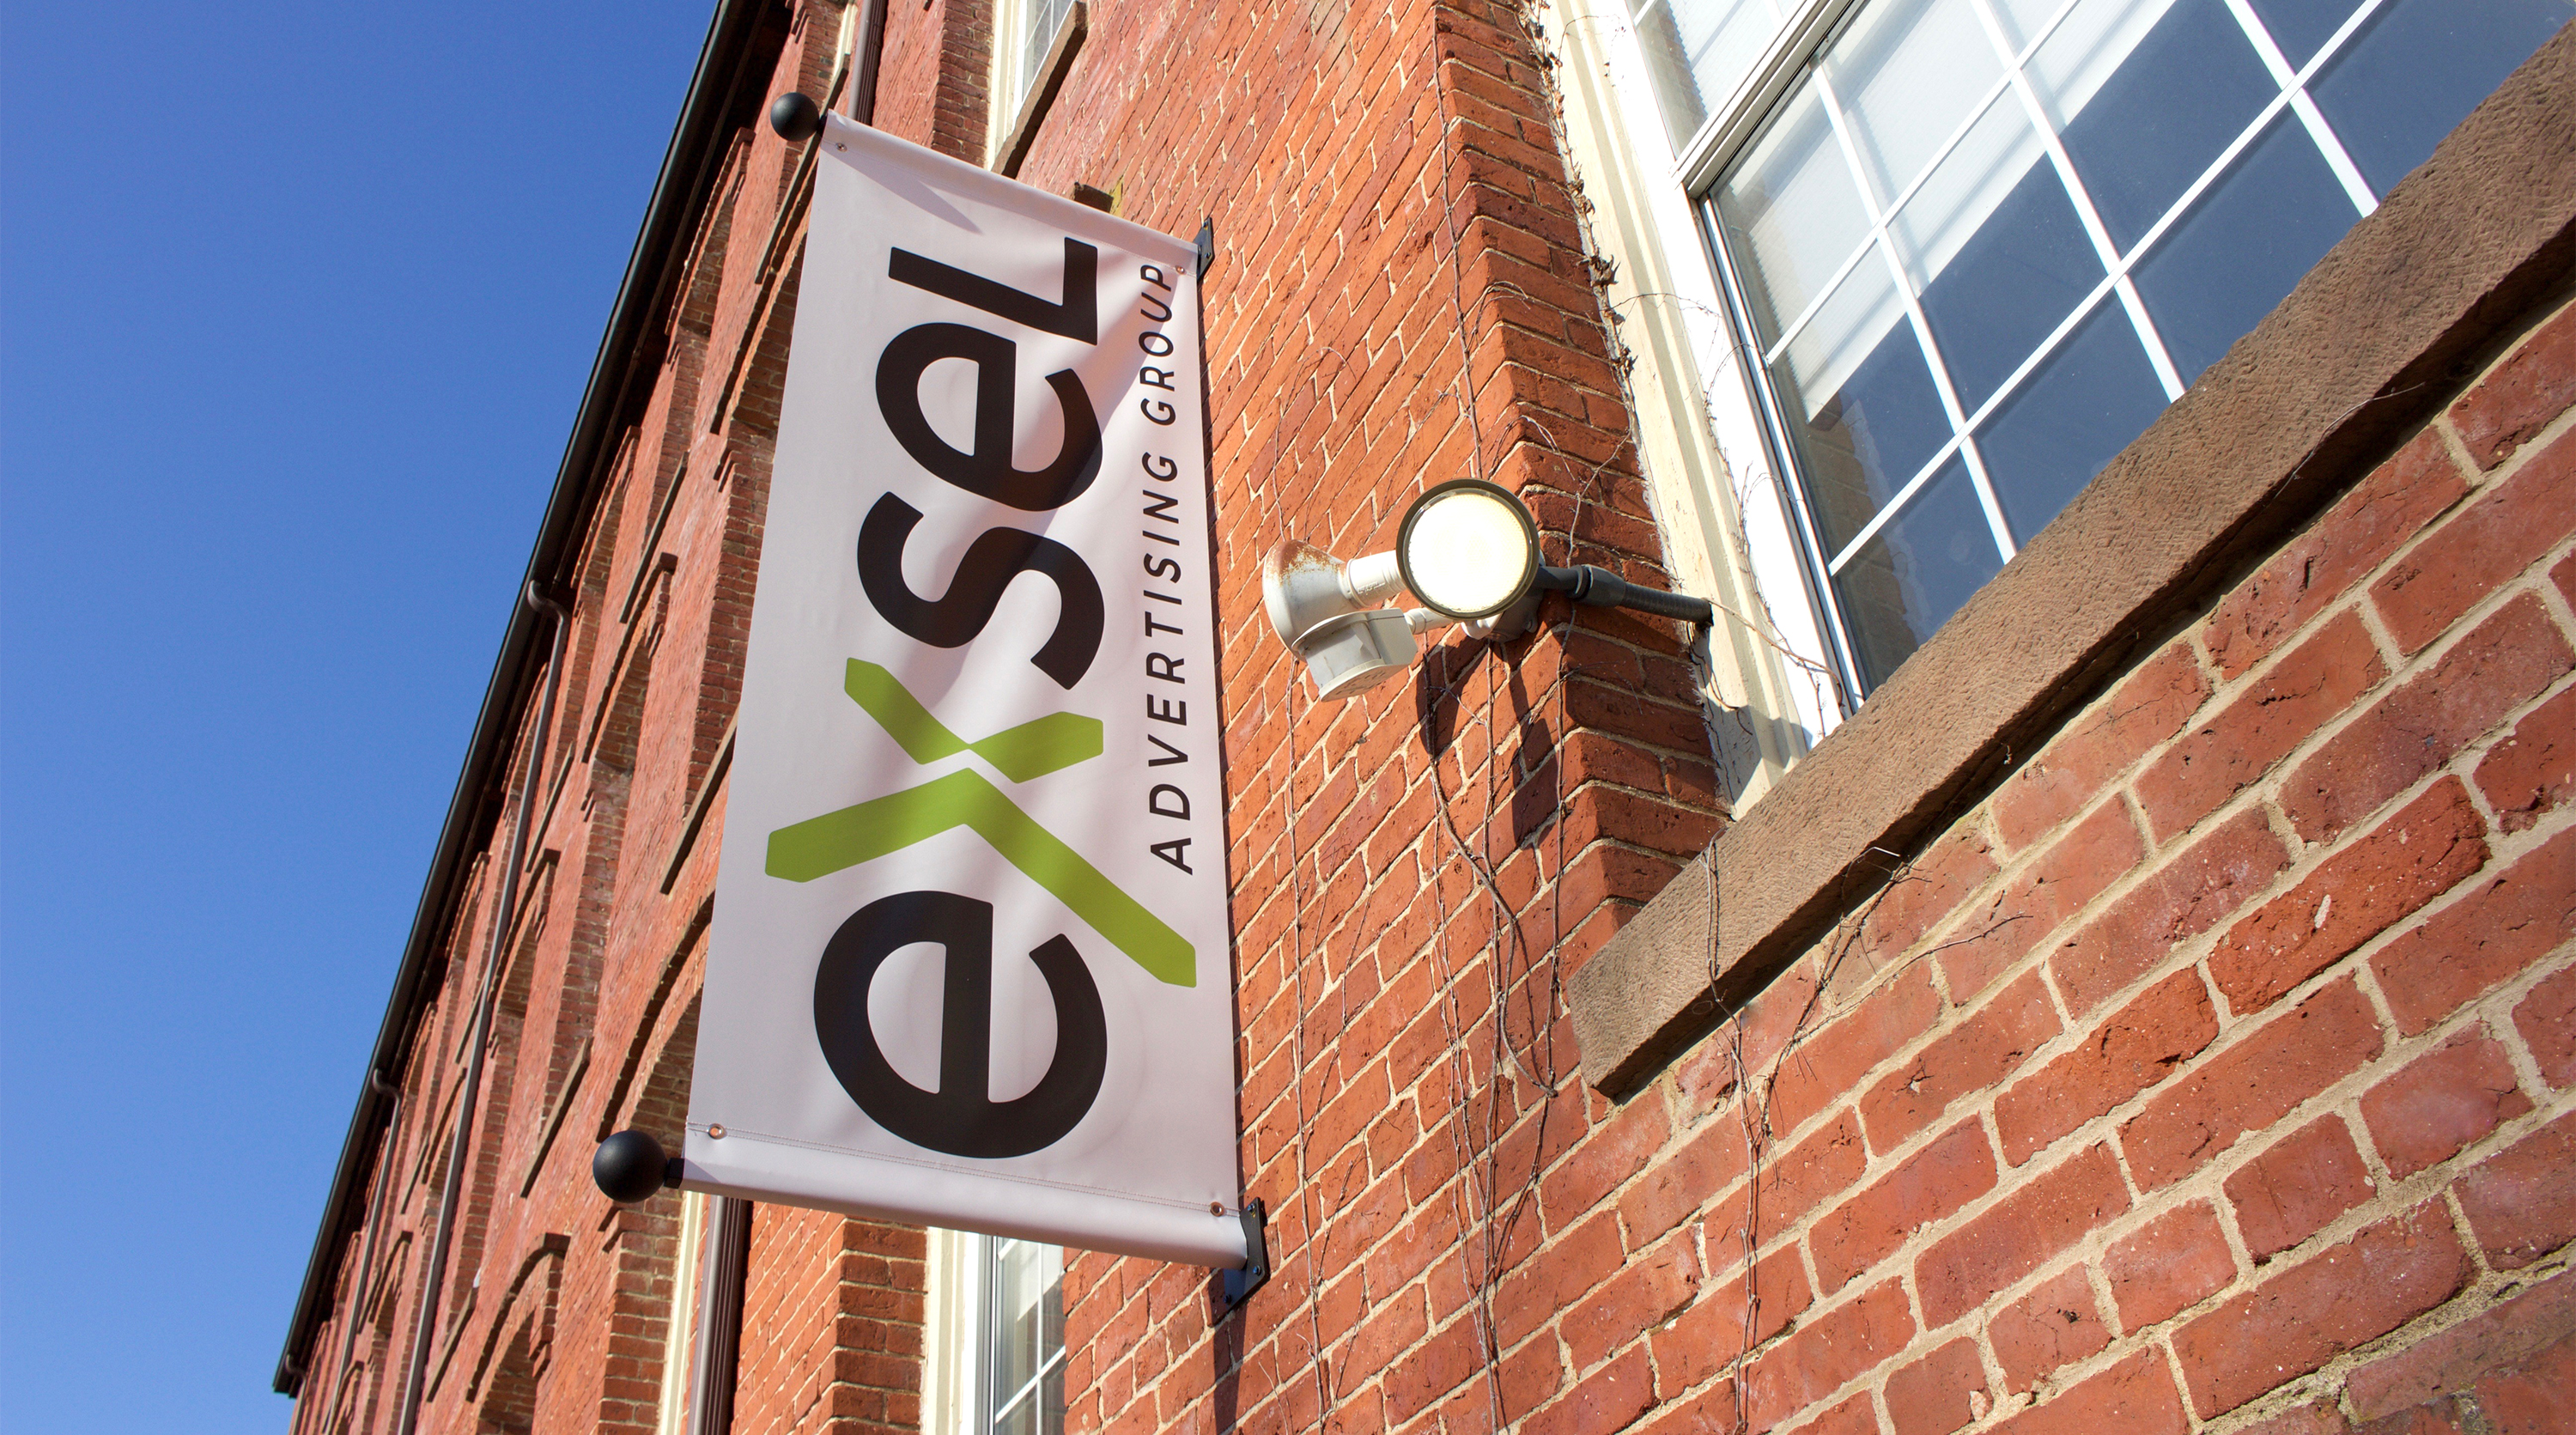 Rebrand of Exsel Advertising Group. New sign on side of brick building.